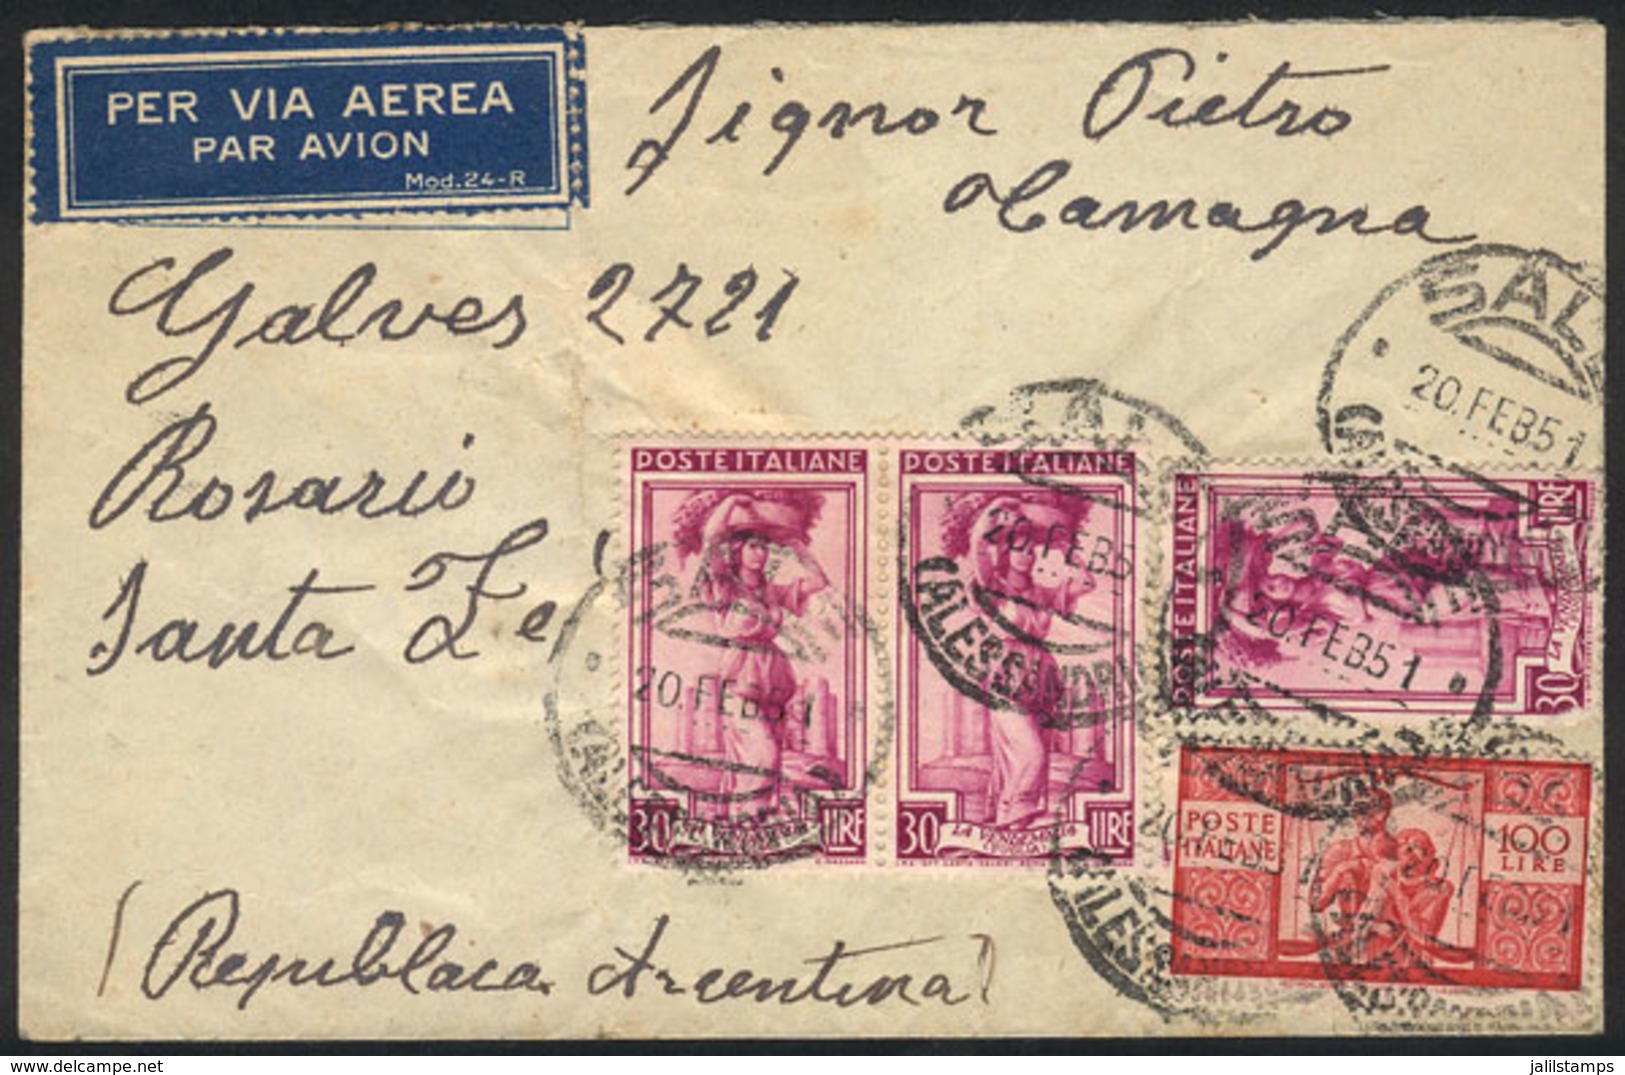 ITALY: Airmail Cover Sent From Sale To Argentina On 20/FE/1951 With Mixed Postage 100L. Democratica + 3x 30L. Lavoro, Sm - Non Classés